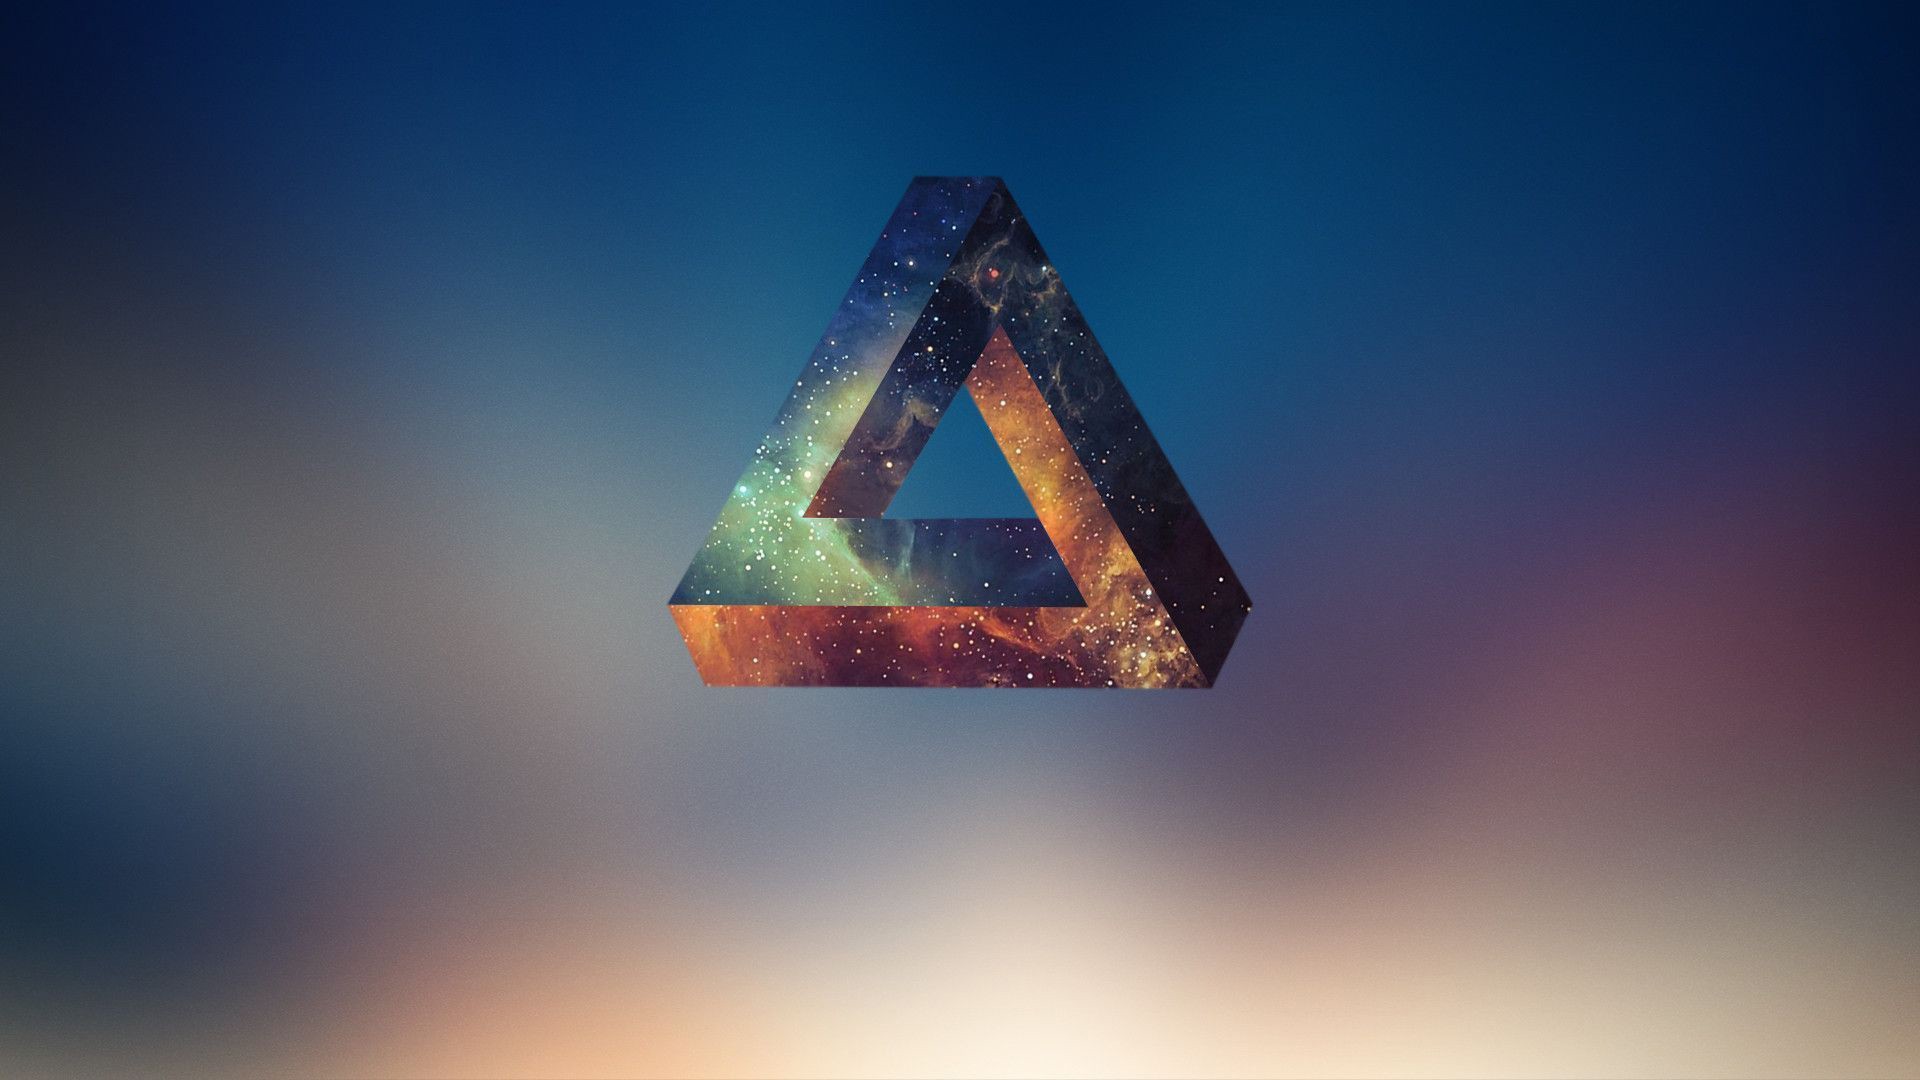 General 1920x1080 Penrose triangle abstract geometry digital art gradient triangle